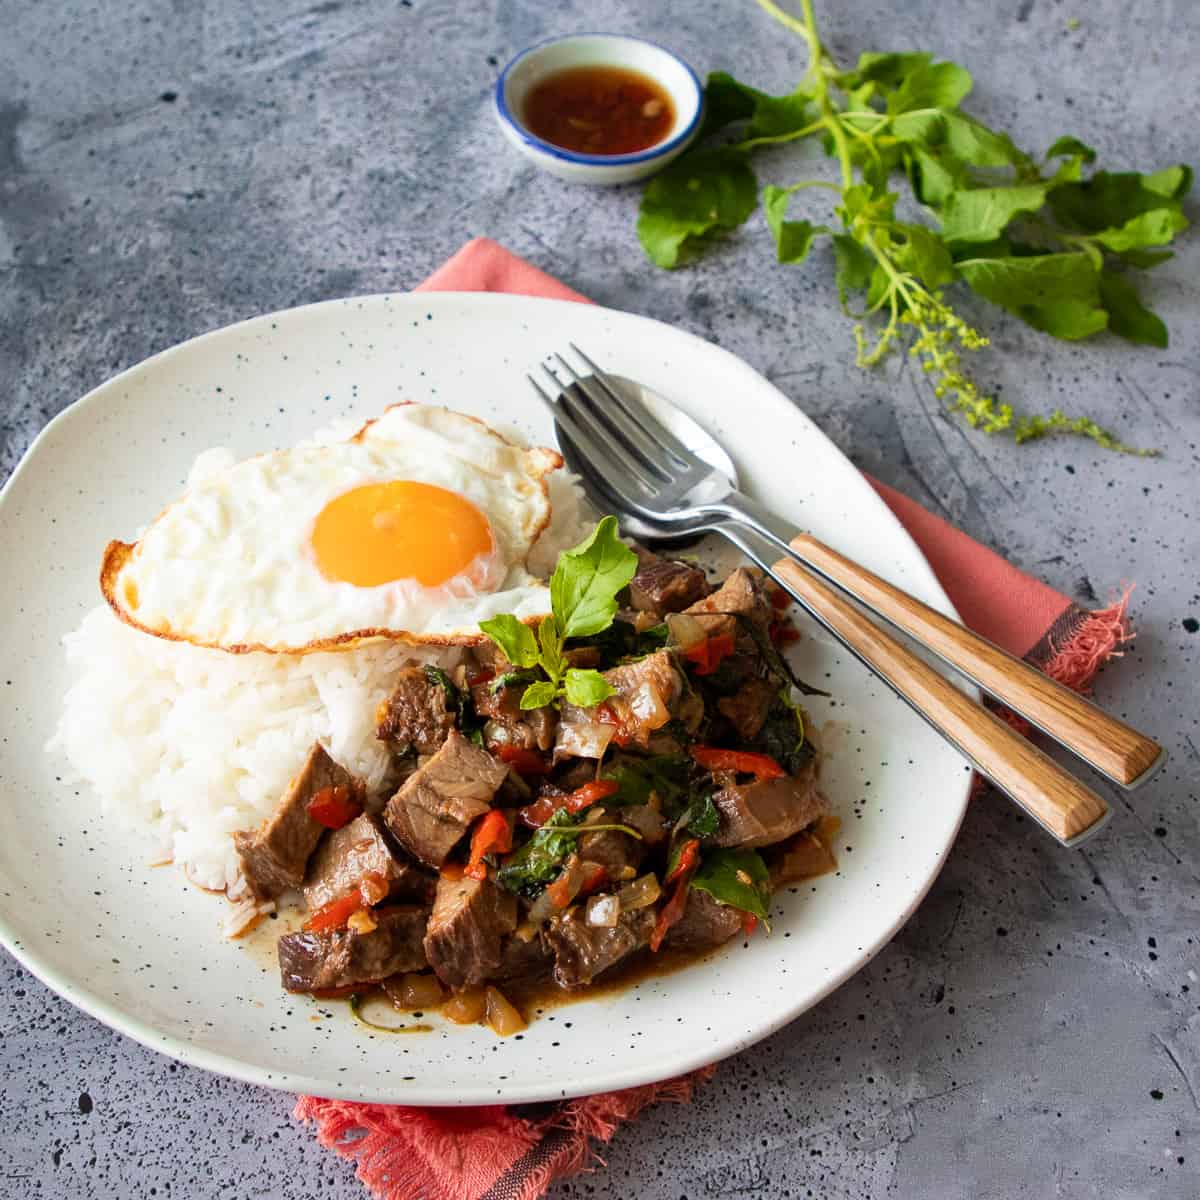 a plate of pad kra pao beef with rice and a fried egg. A side of fish sauce condiment and holy basil sprigs